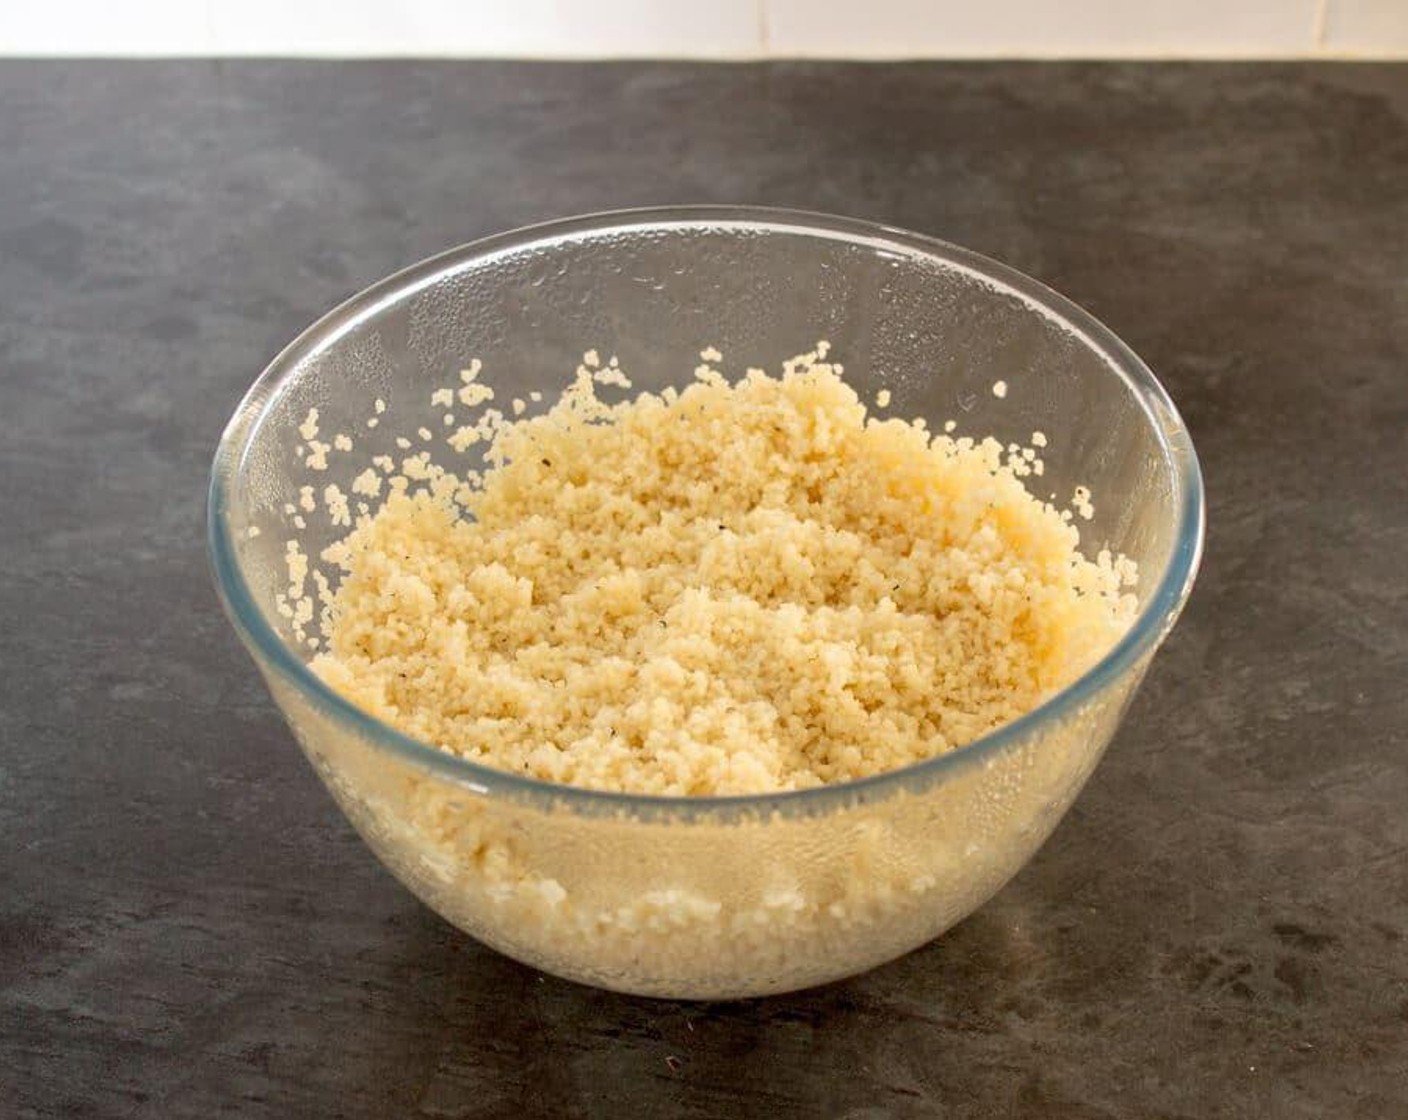 step 1 In a large glass bowl, add the Couscous (3/4 cup), a generous helping of Salt (to taste) and Ground Black Pepper (to taste), and about 1 tablespoon of the oil from the sundried tomatoes jar. Pour in the Water (1 1/4 cups) stir with a fork and cover with cling film. Leave to one side whilst we prepare the rest of the dish.